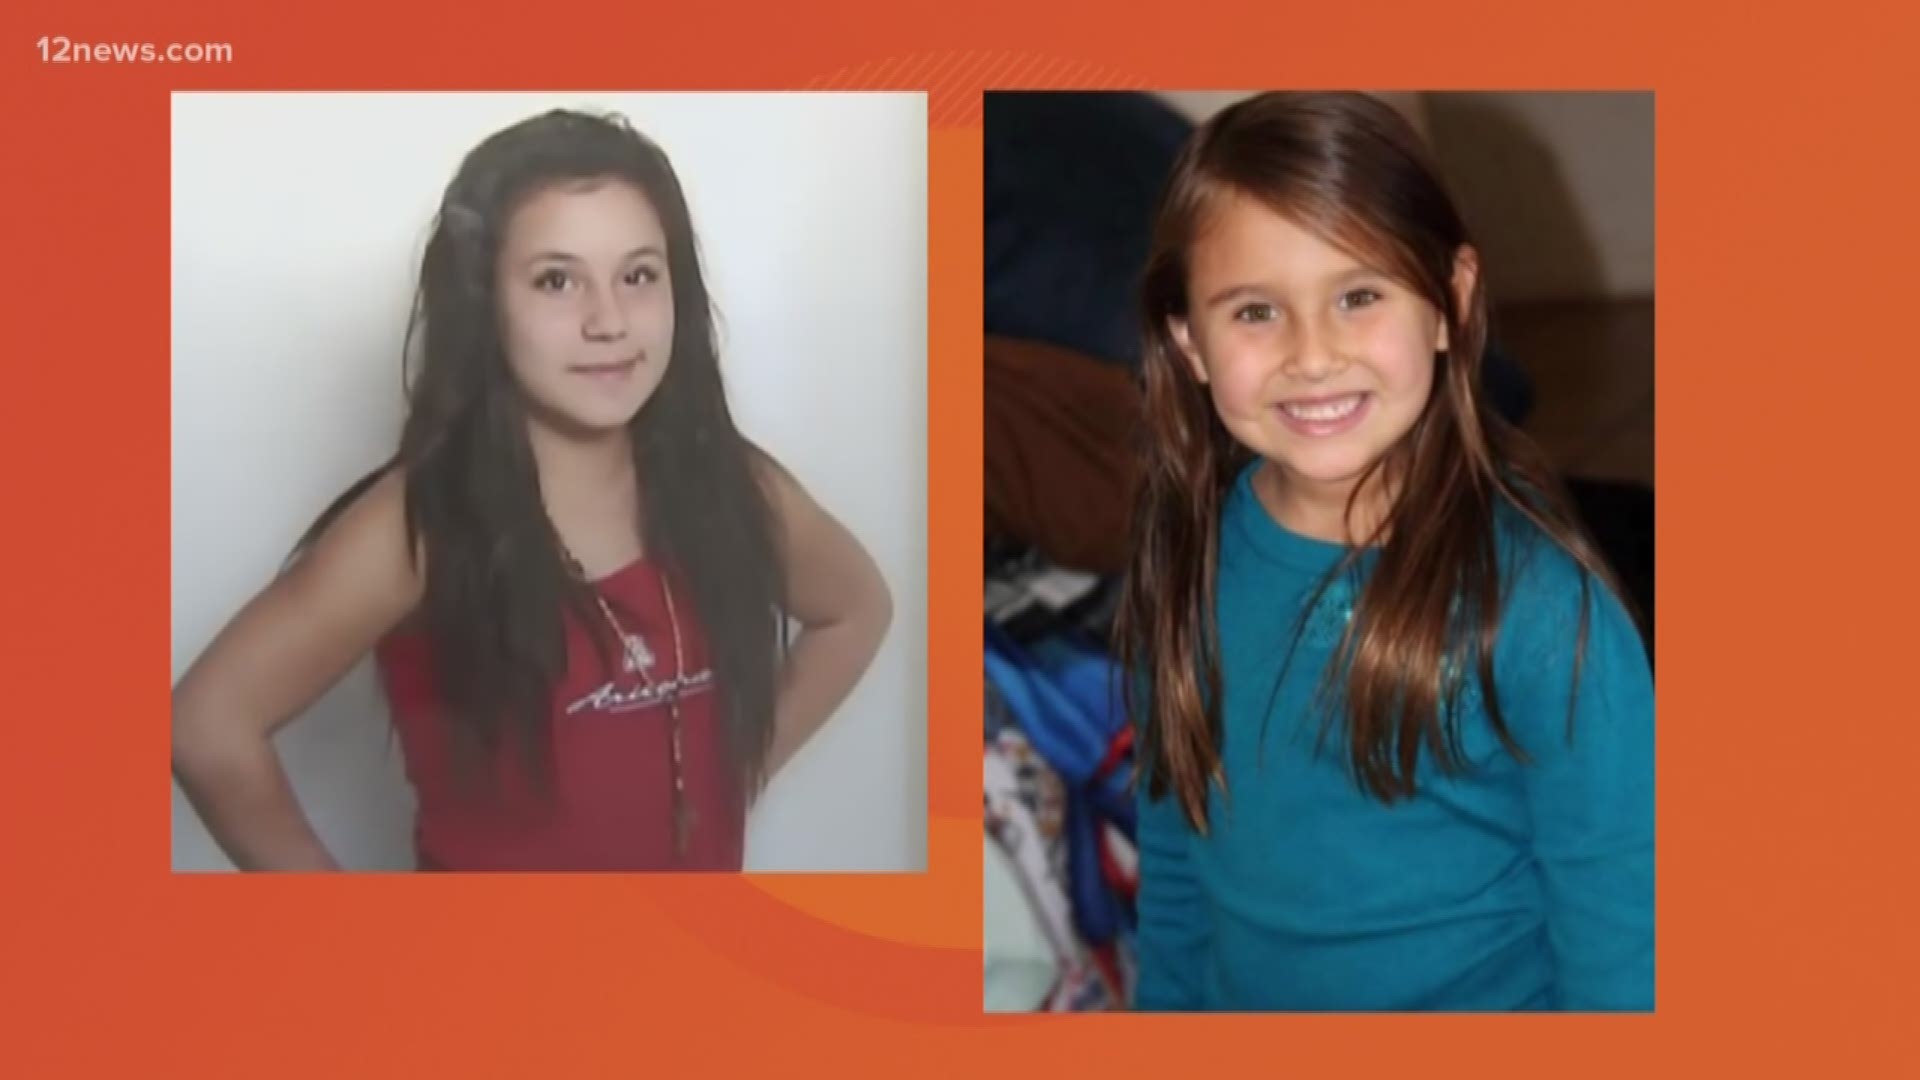 Tucson man accused of killing two young girls within two years of each other will be arraigned.